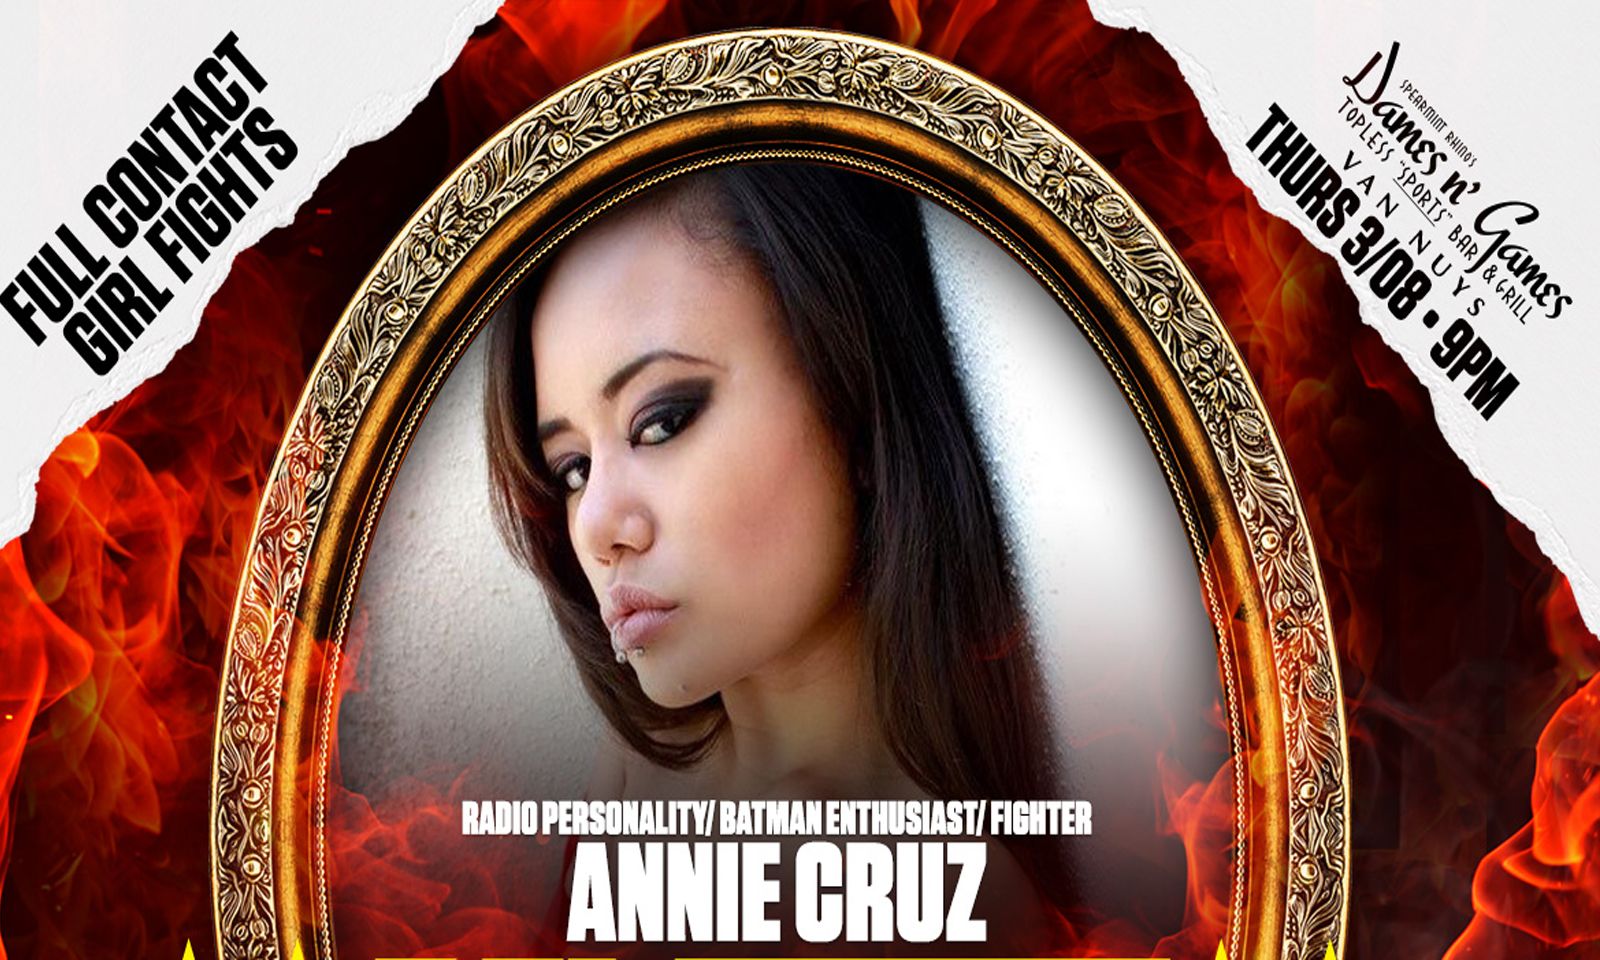 Annie Cruz is the Main Event Match at Caliente Cage Rage